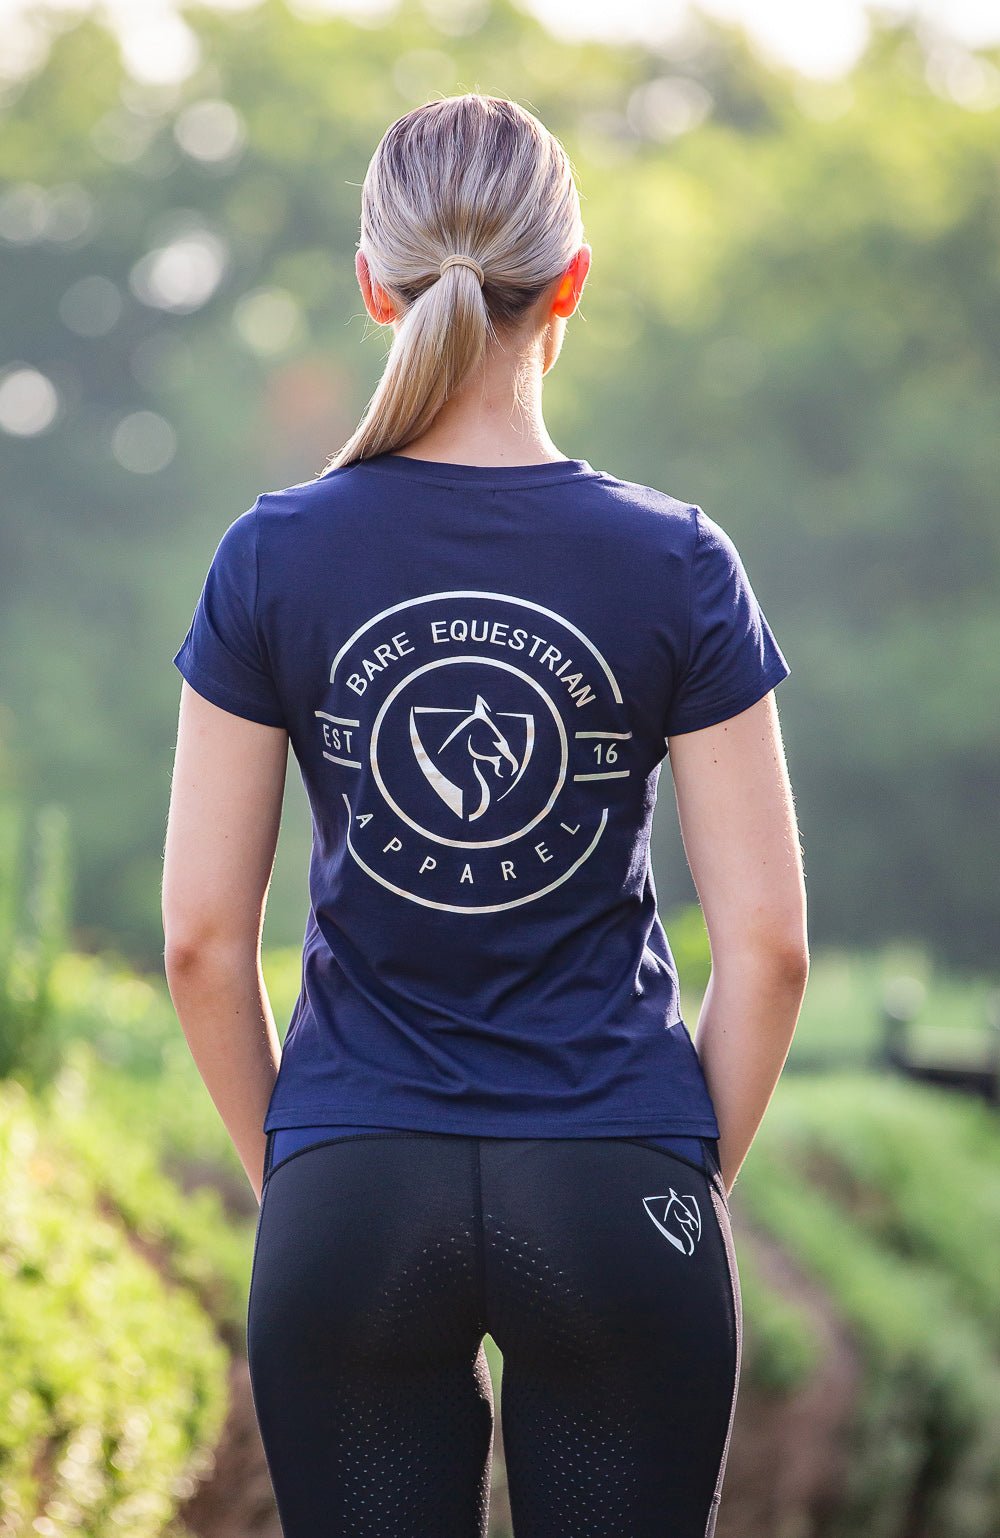 BARE Emblem T-Shirt - and Silver – Bare Equestrian